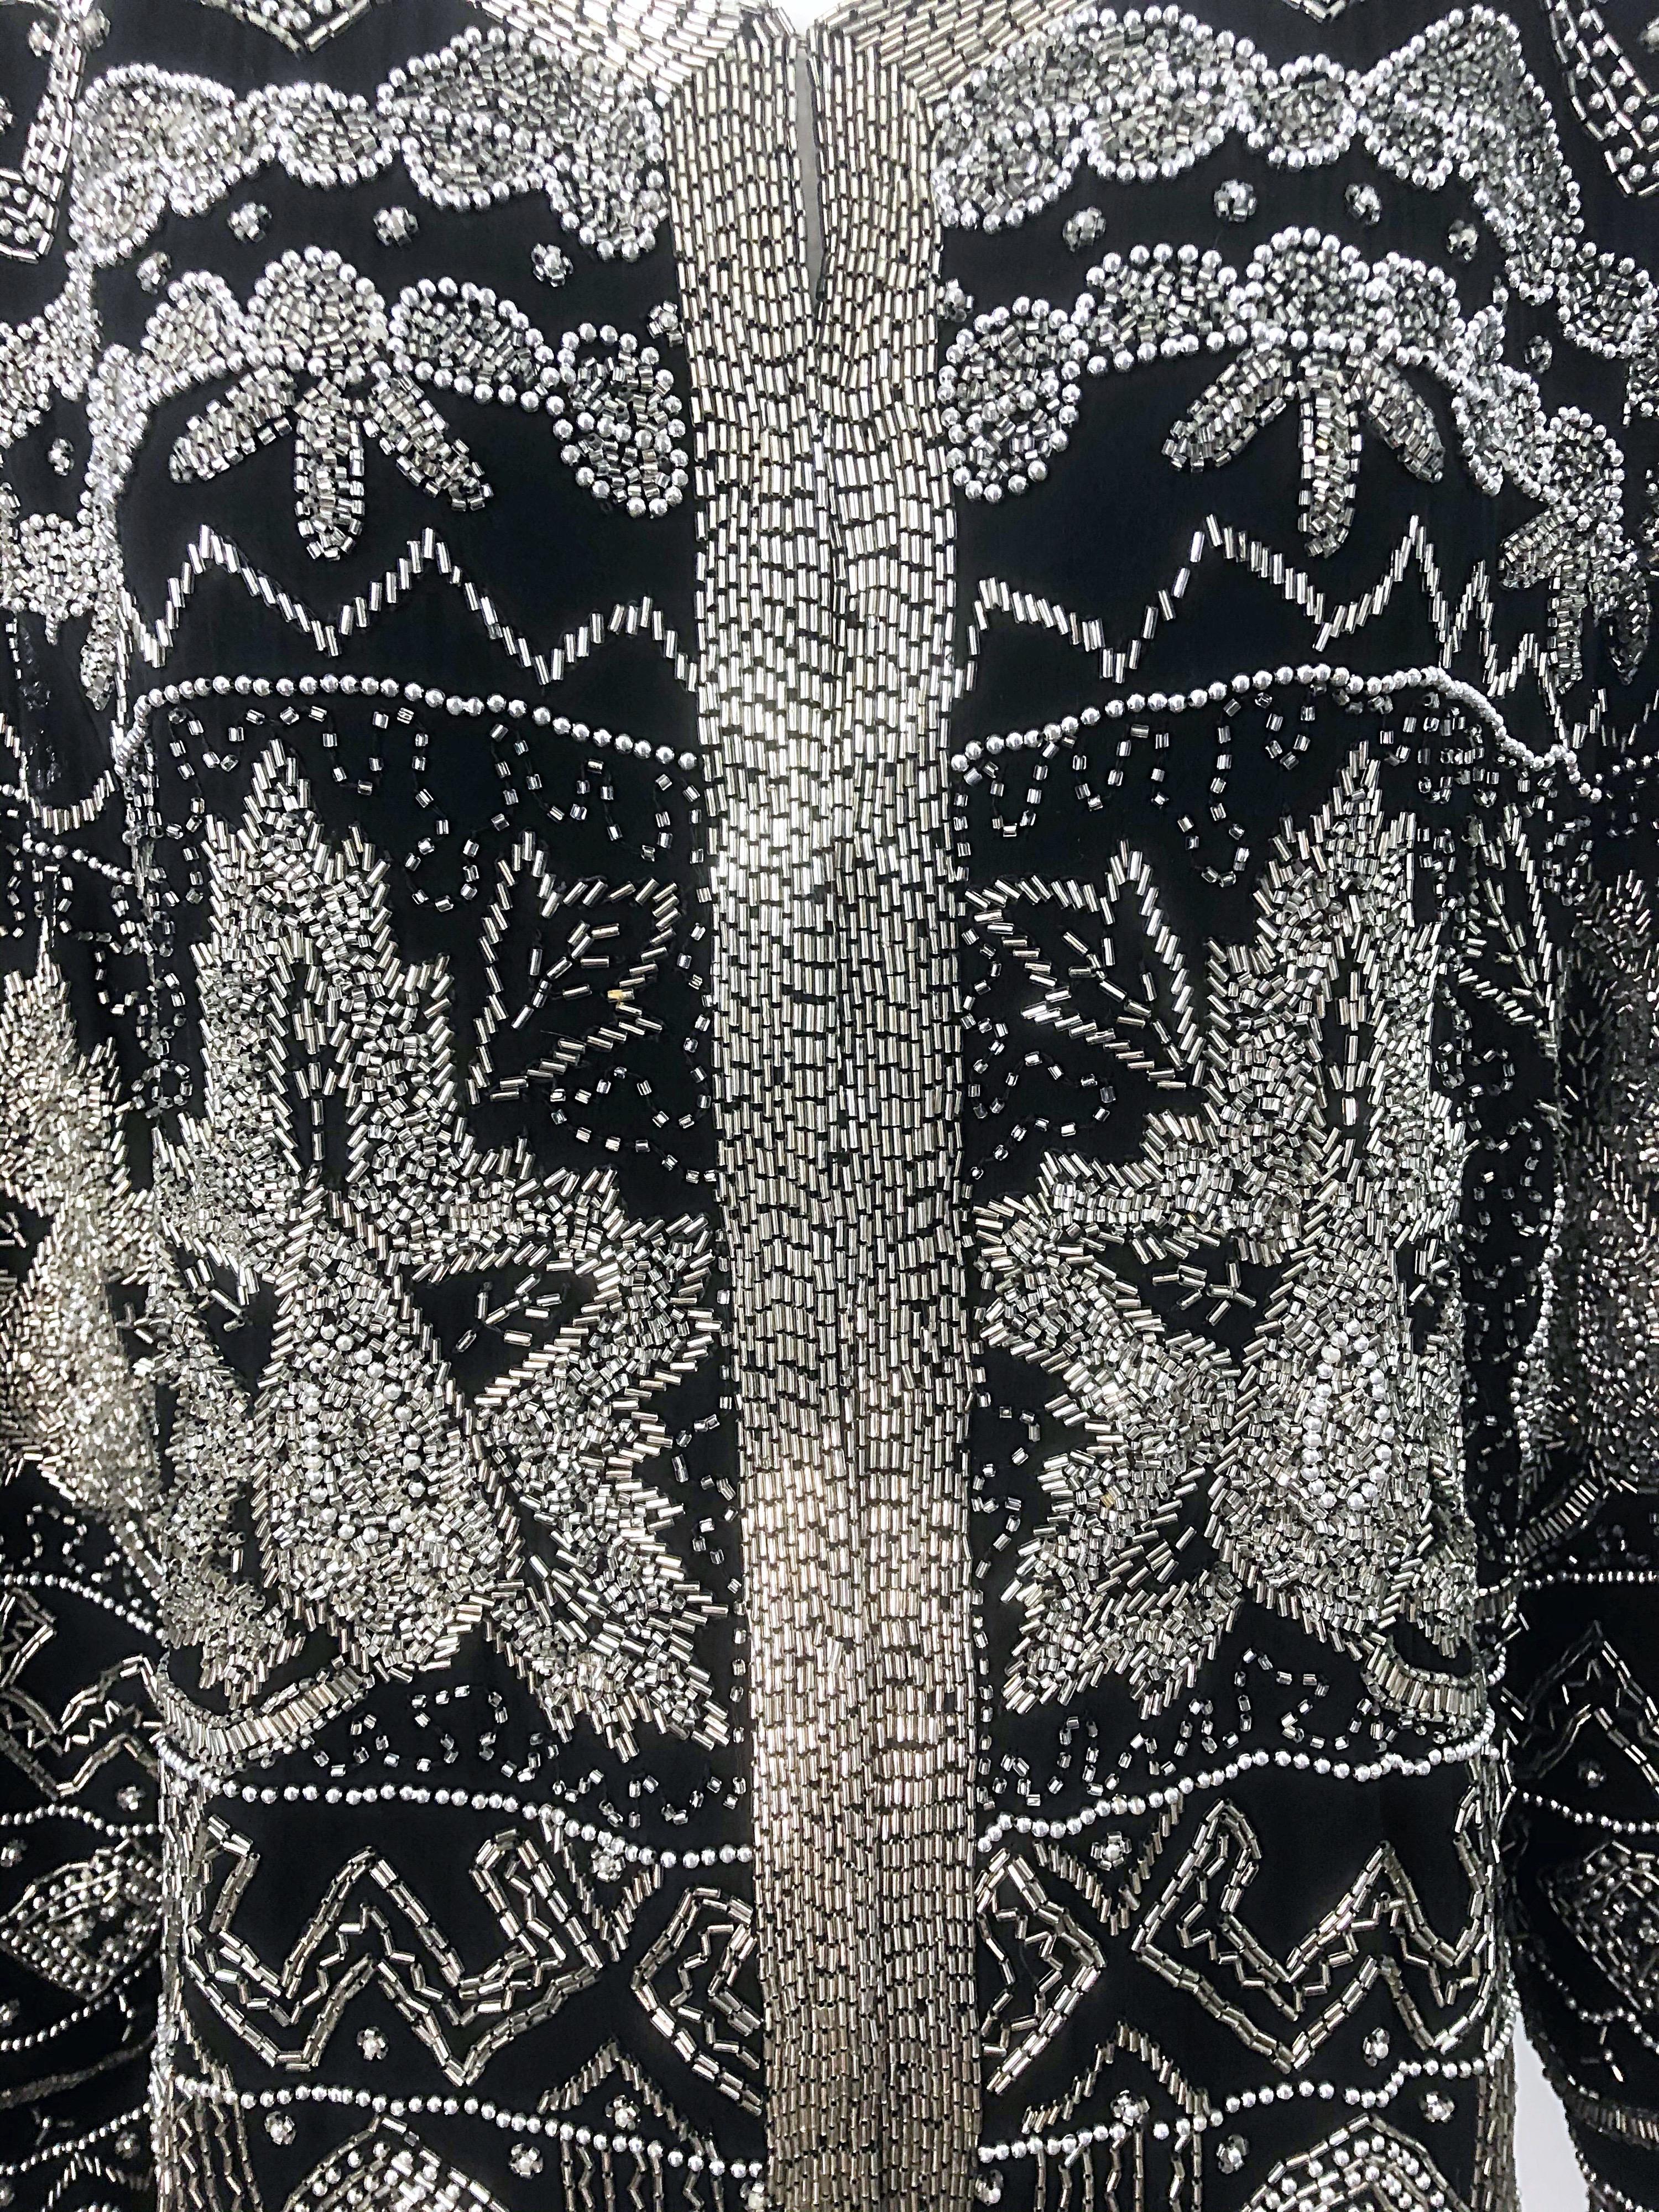 Intricate 1990s Heavily Beaded 3XL Black Silver Sequined Vintage 90s Jacket Top In Excellent Condition For Sale In San Diego, CA